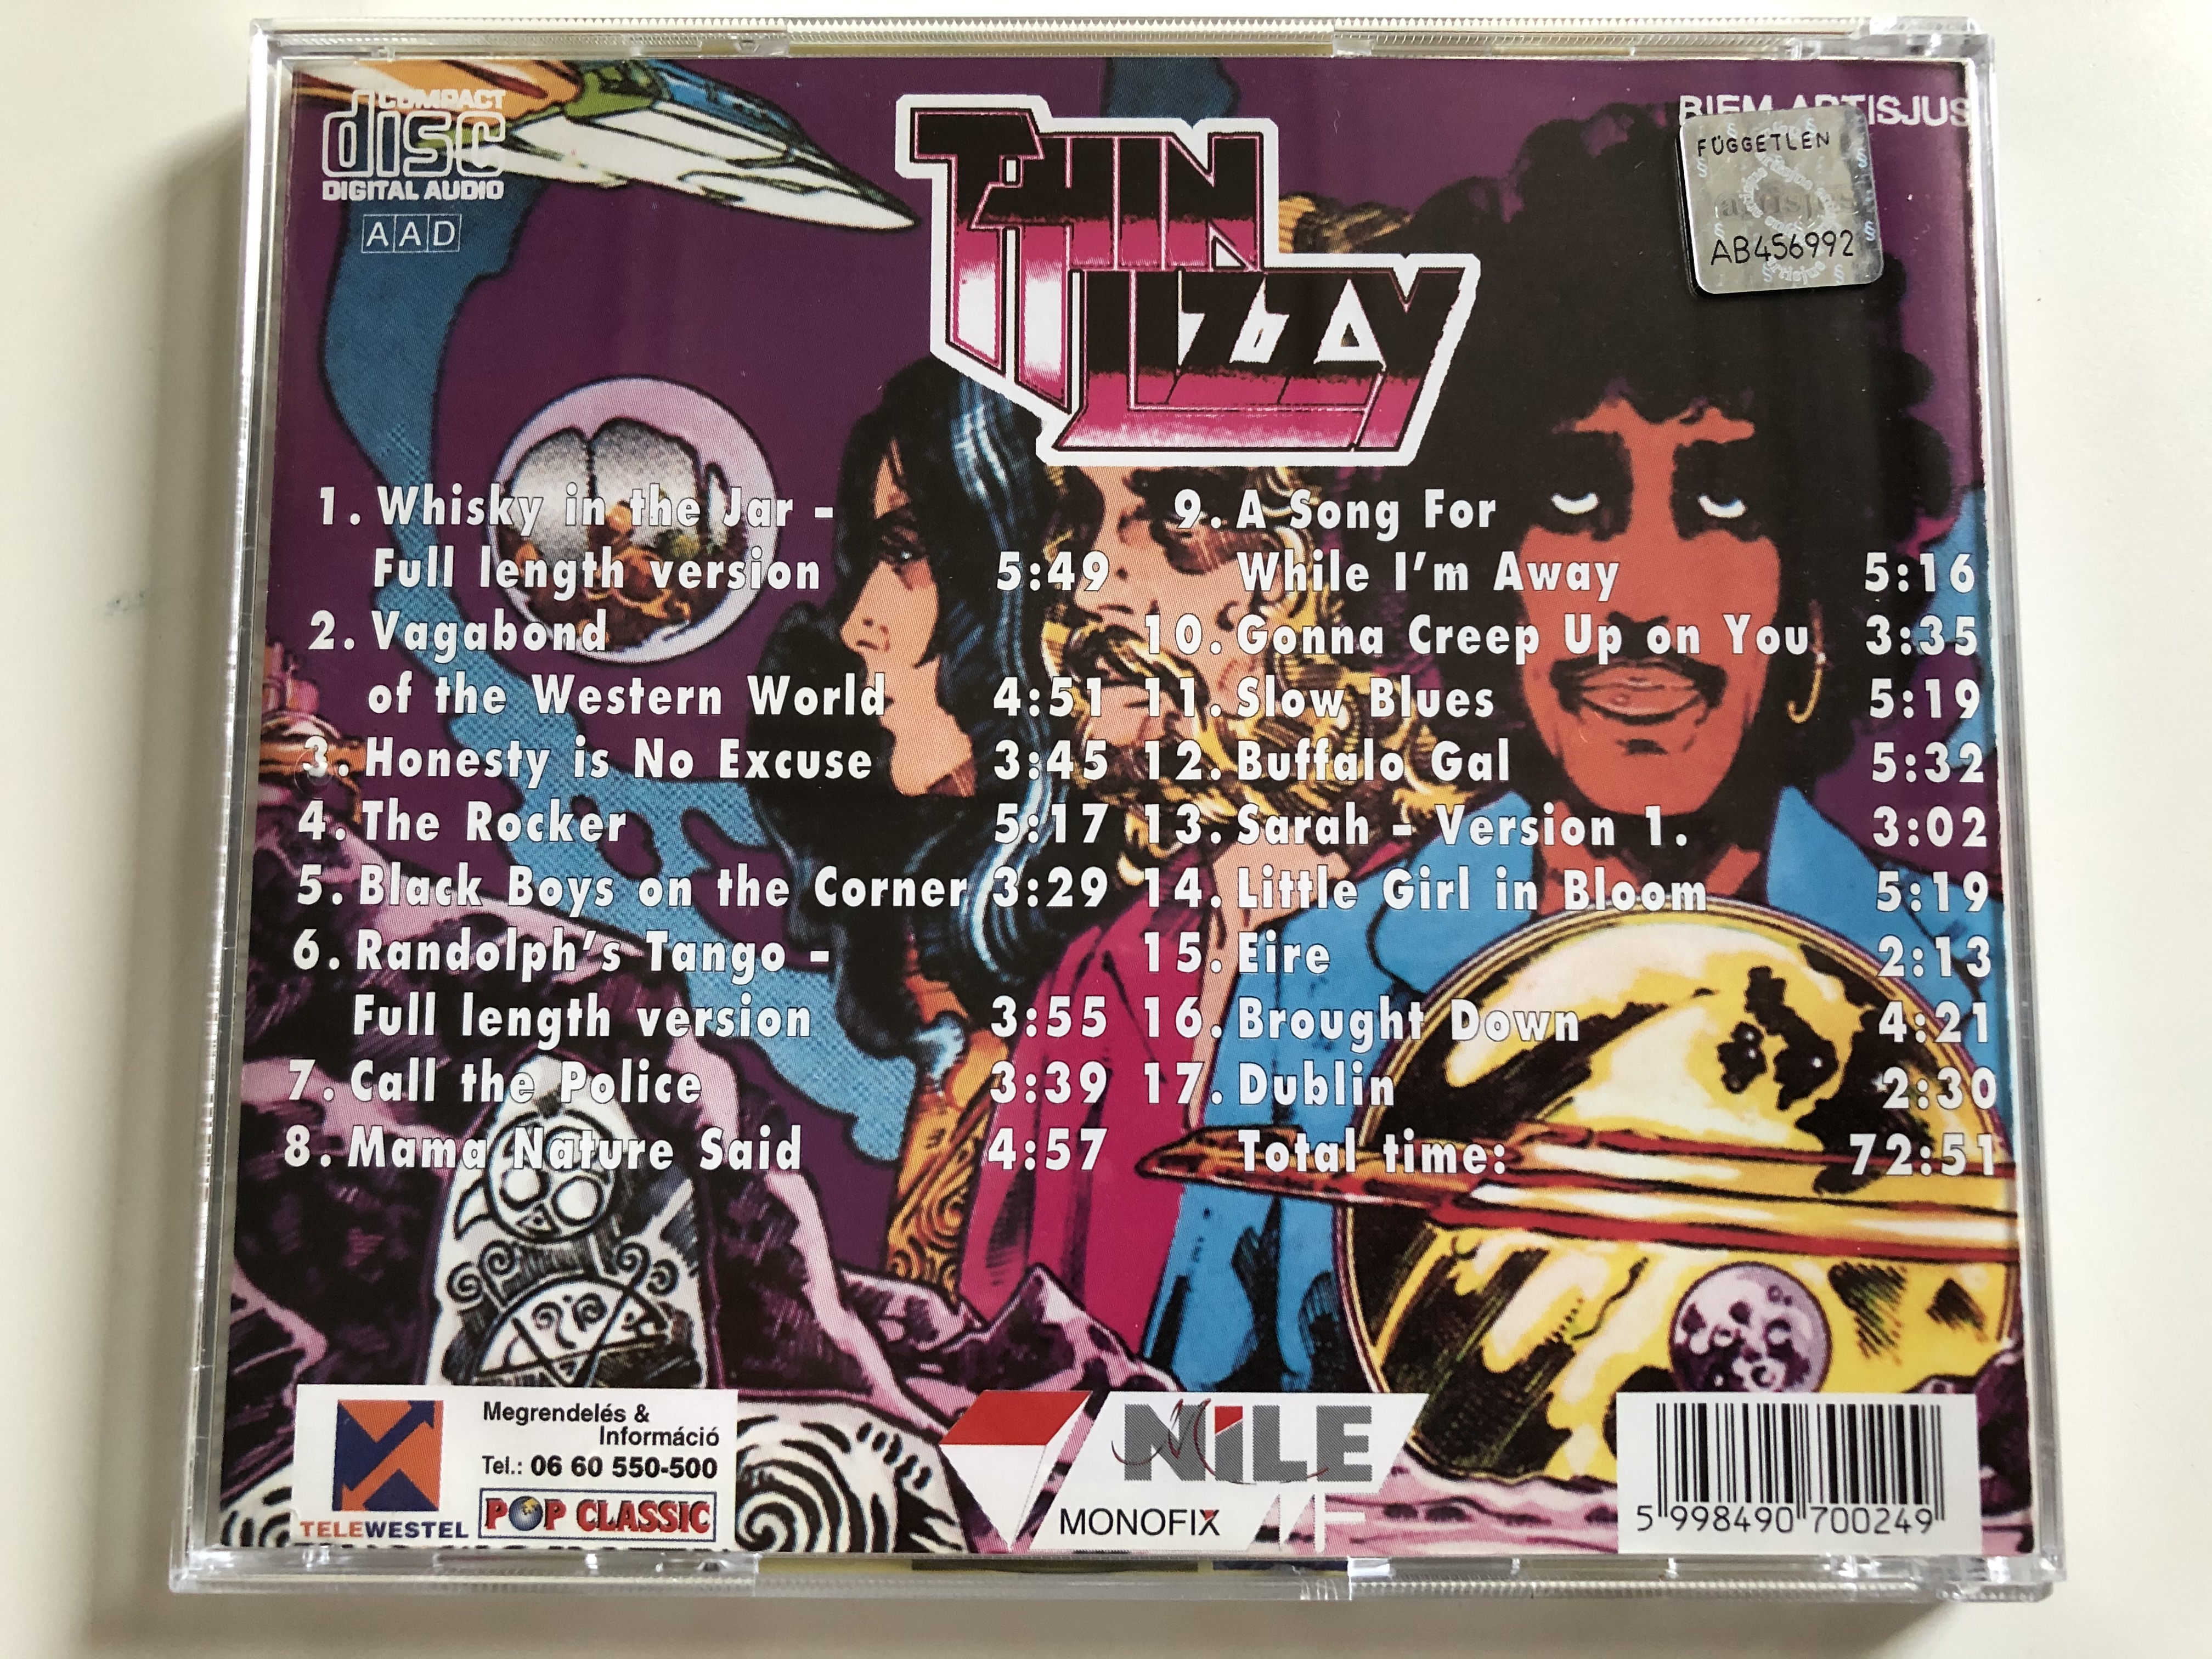 whisky-in-the-jar-thin-lizzy-total-time-7251-pop-classic-euroton-audio-cd-eucd-0024-3-.jpg